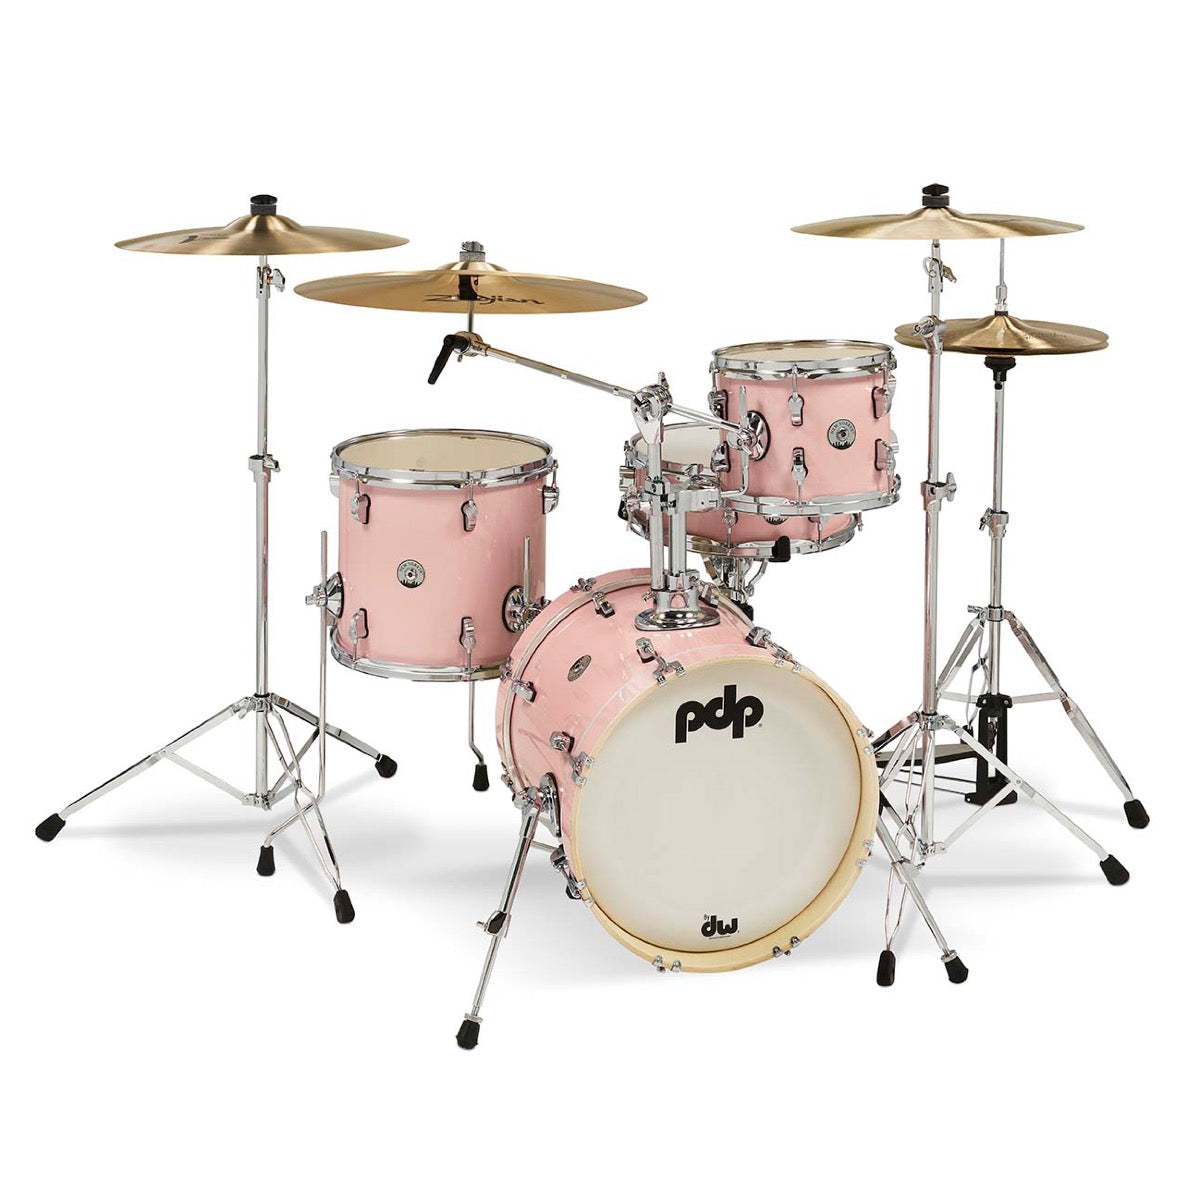 Pacific Drums & Percussion New Yorker Series 4-Piece Kit - Pale Rose Sparkle